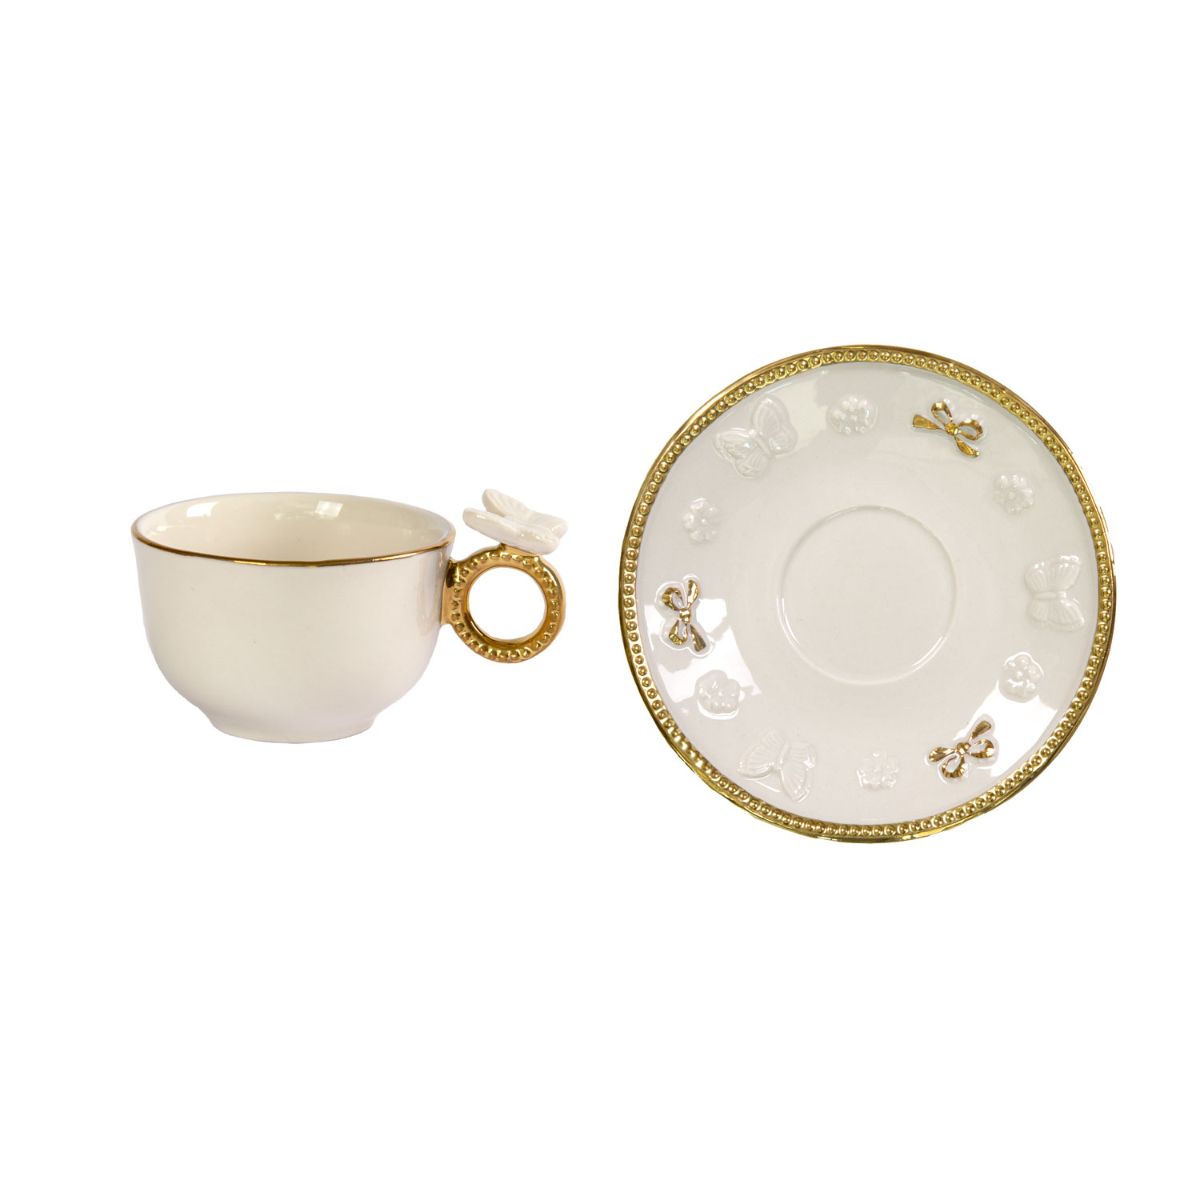 Butterfly White & Gold Coffee Cup & Saucer